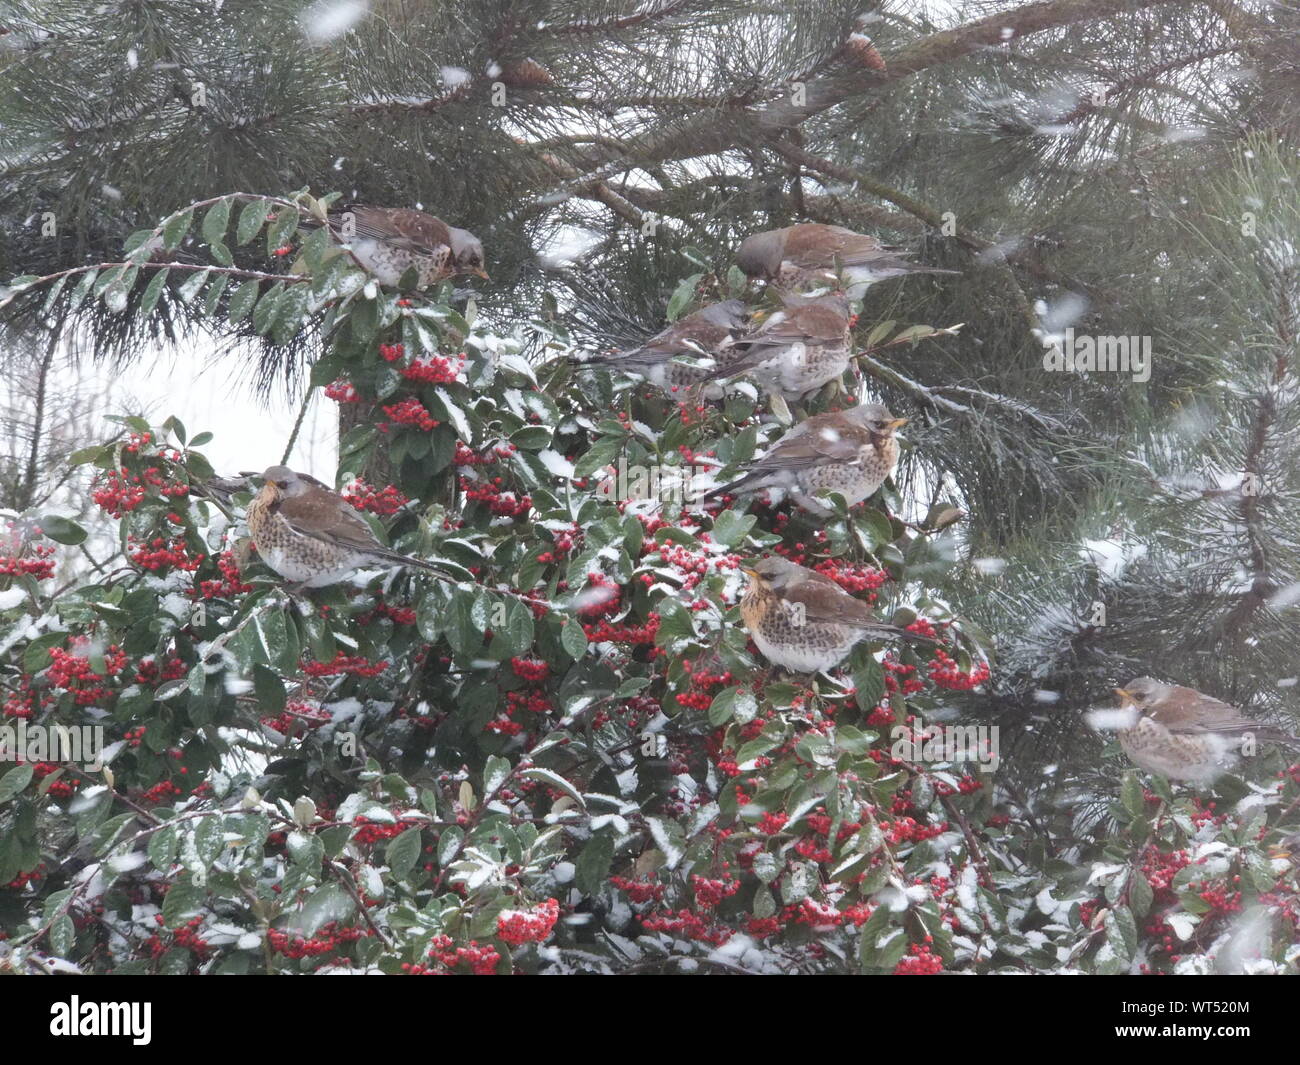 High Angle View Of Thrushes Perching On Berry Tree During Snowfall Stock Photo